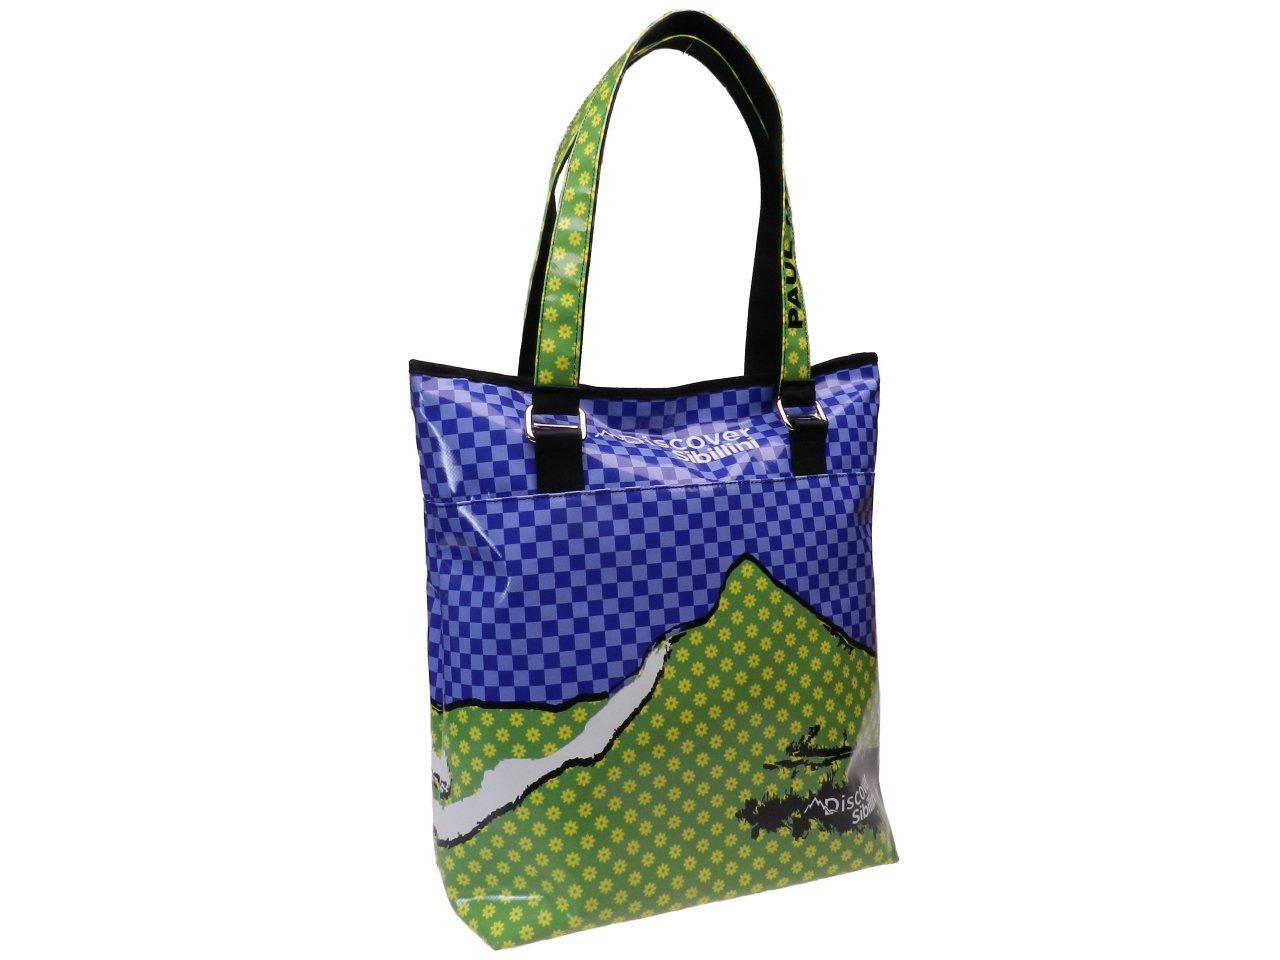 MAXI SHOPPER "DISCOVER SIBILLINI" BLACK, BLUE AND GREEN COLOUR WITH 'MONTE SIBILLA' PRINT. MODEL SELZ MADE OF LORRY TARPAULIN. - Limited Edition Paul Meccanico